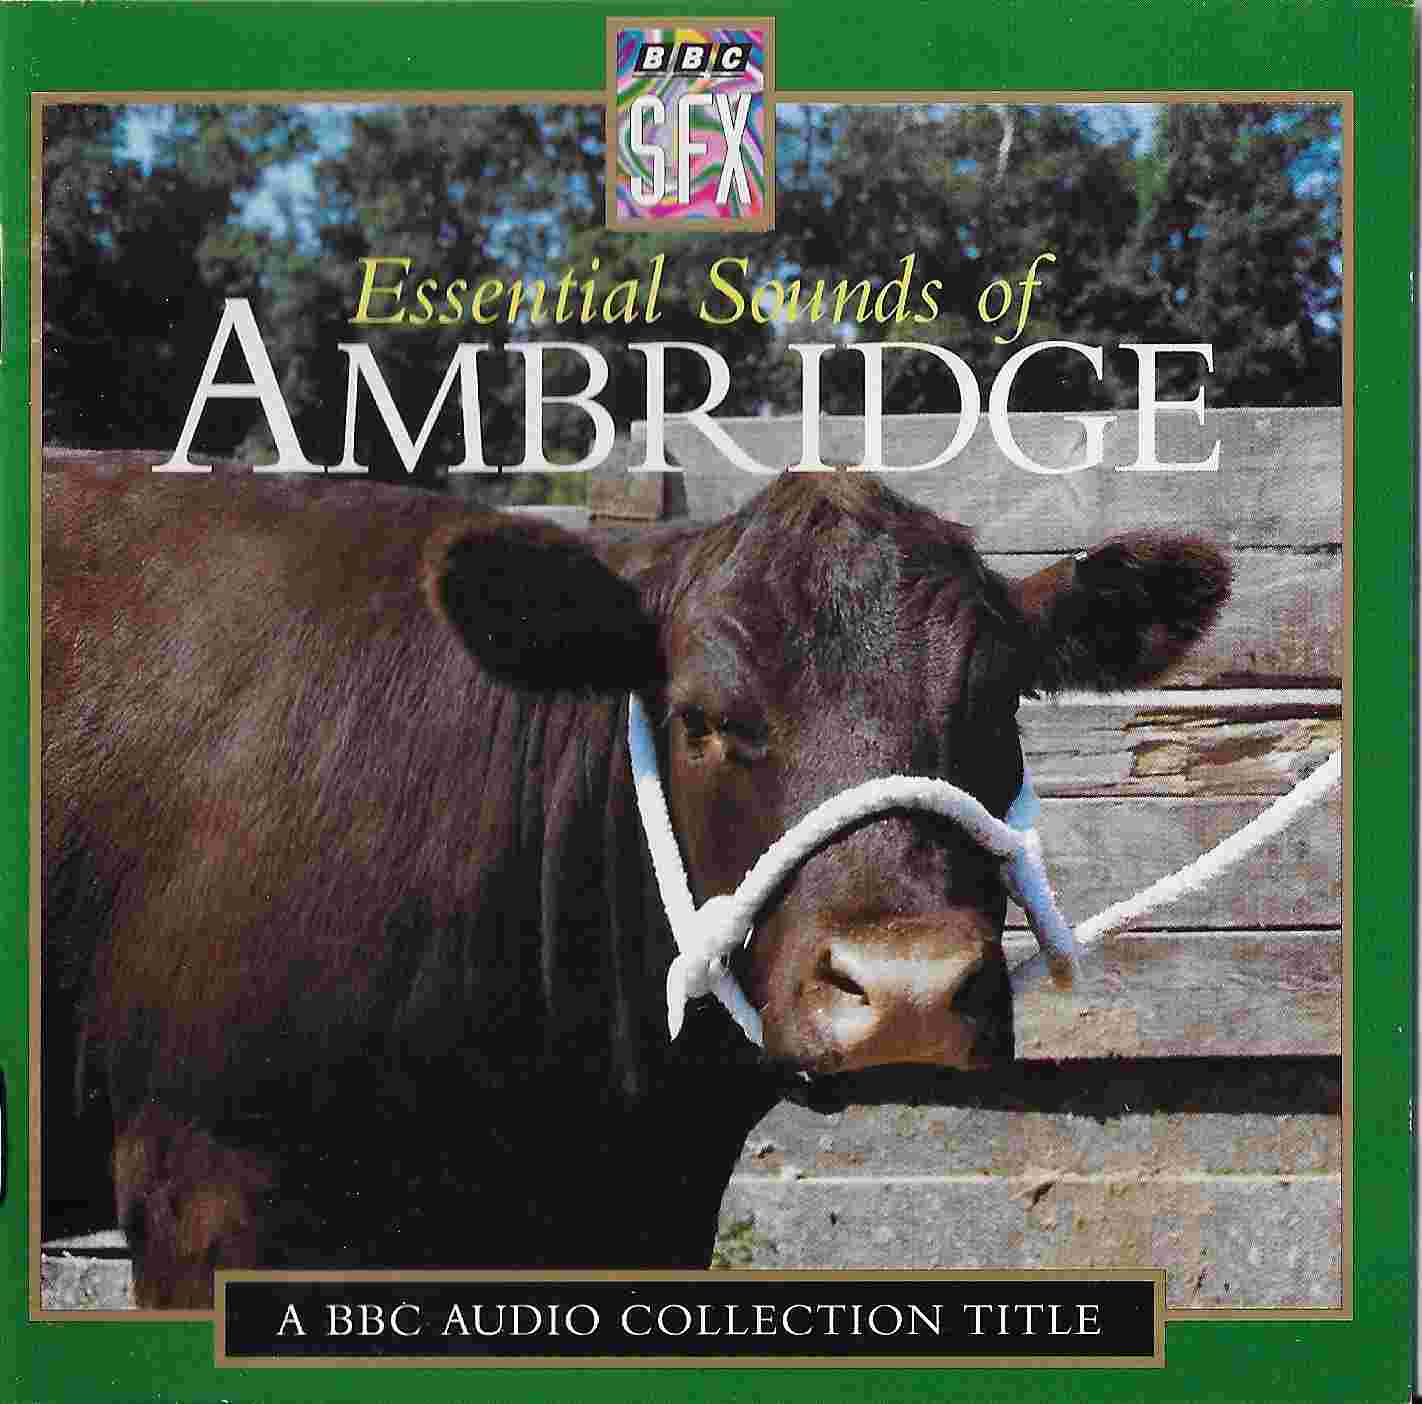 Picture of Essential sounds of Ambridge by artist Various from the BBC cds - Records and Tapes library